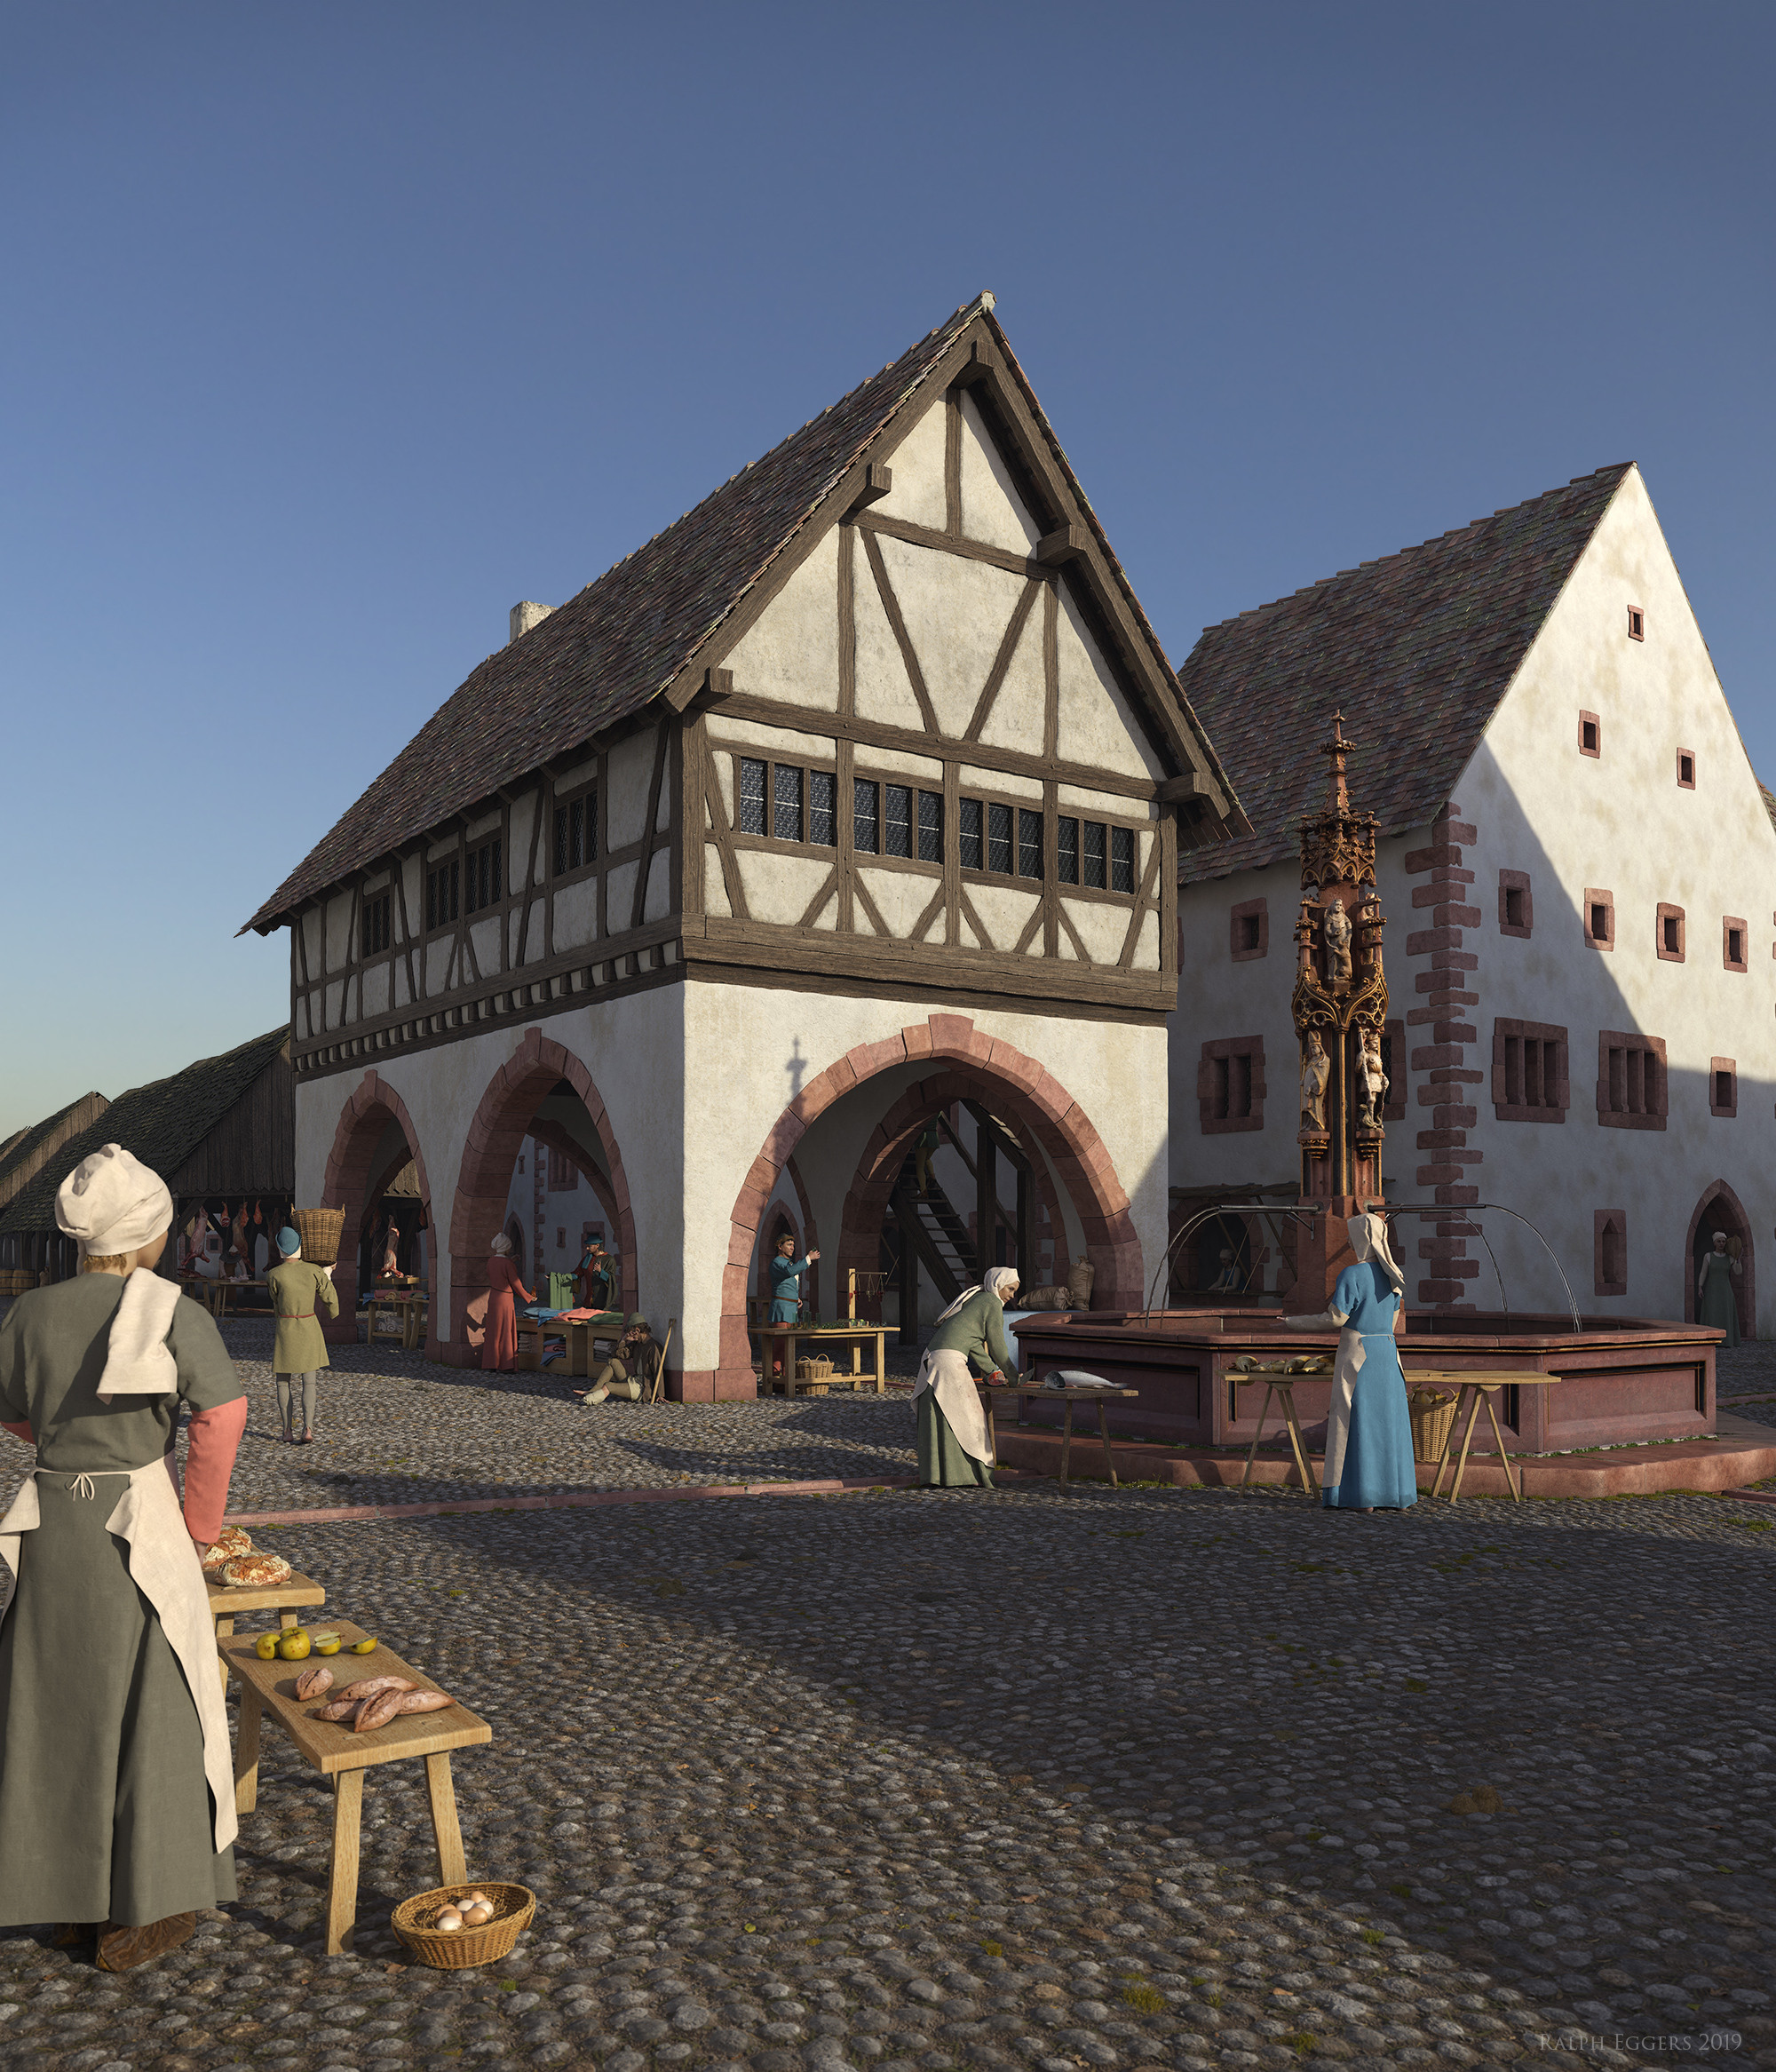 Freiburg's market in the late middle ages